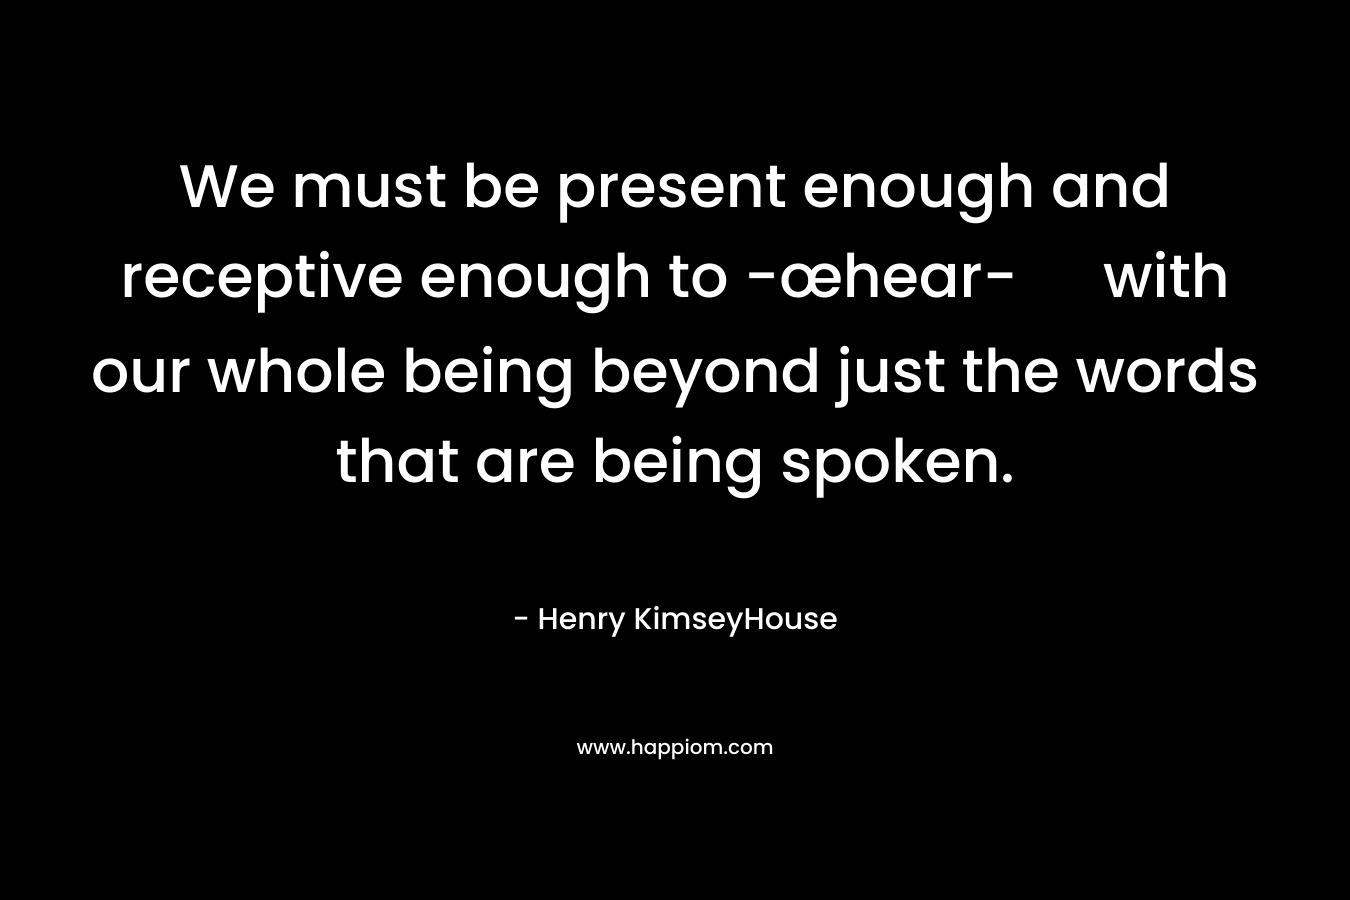 We must be present enough and receptive enough to -œhear- with our whole being beyond just the words that are being spoken. – Henry KimseyHouse